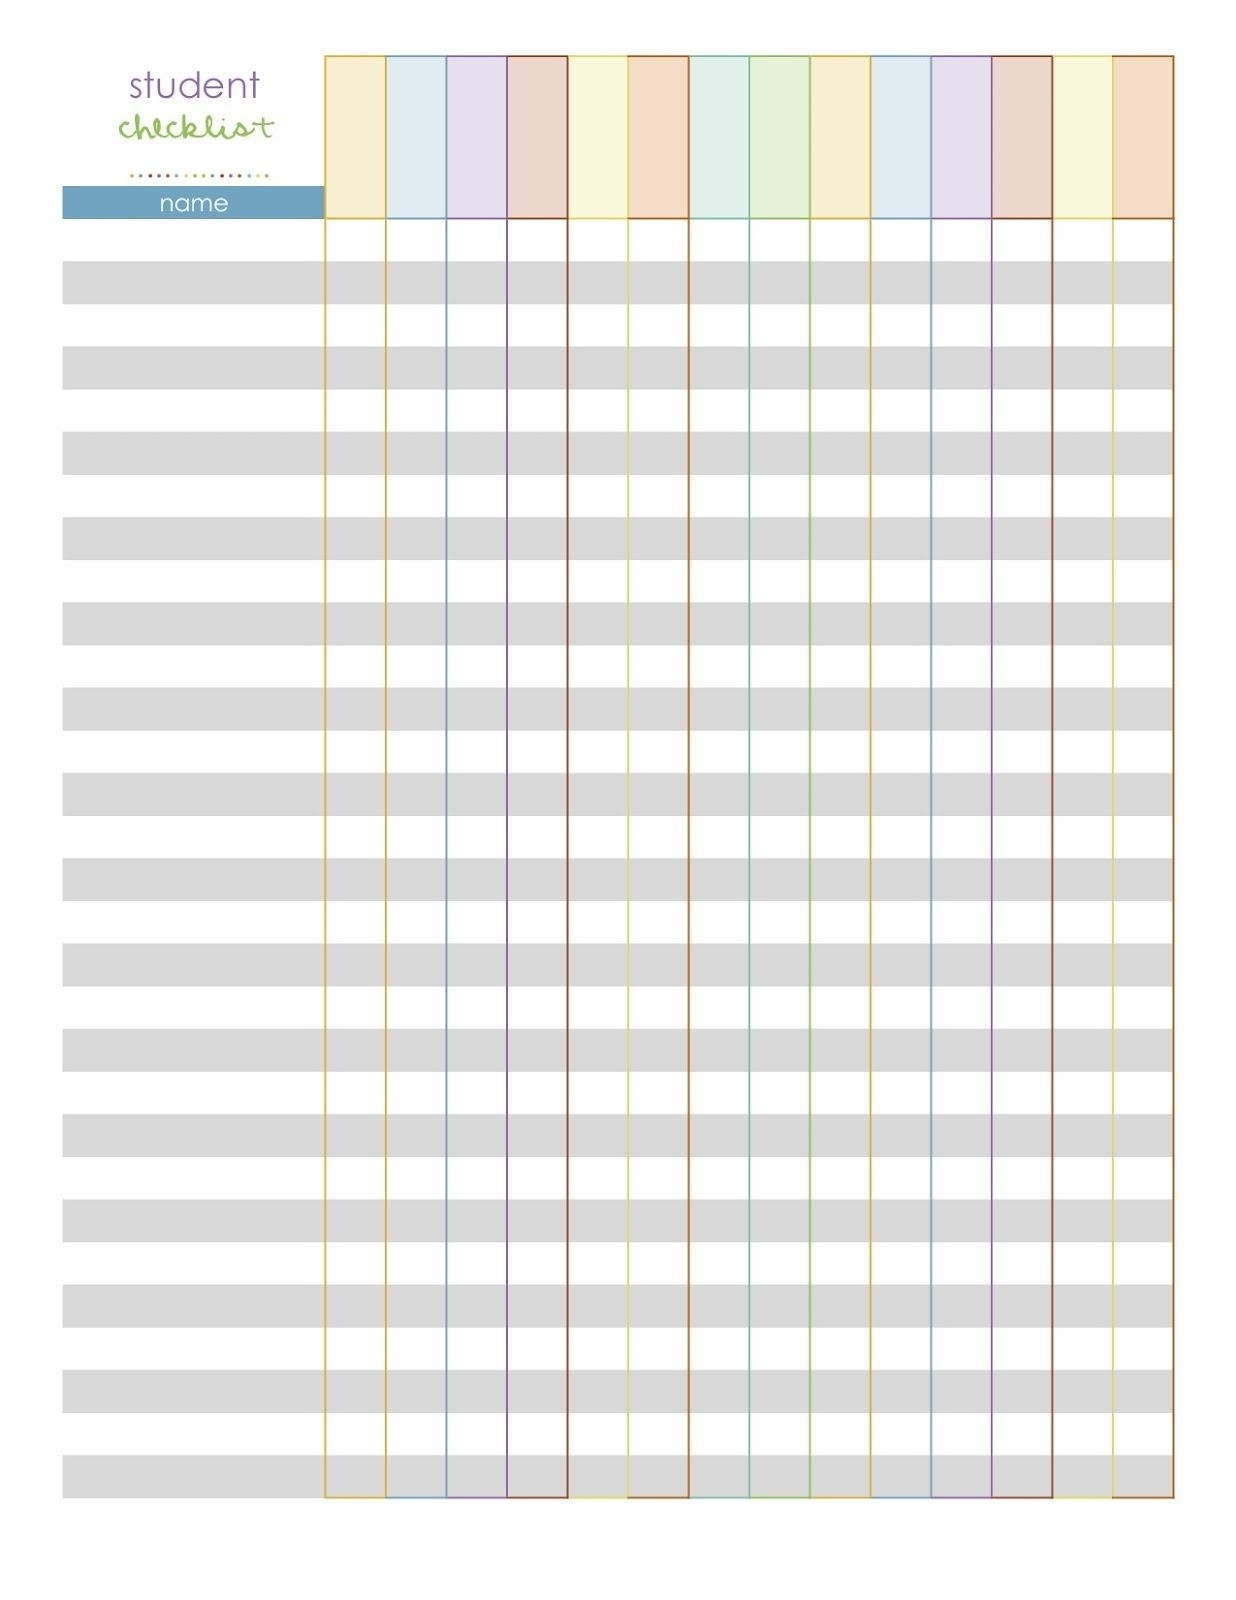 Elementary Class List Template | Monthly Planning Pages- A-Blank Monthly Checklist Printable